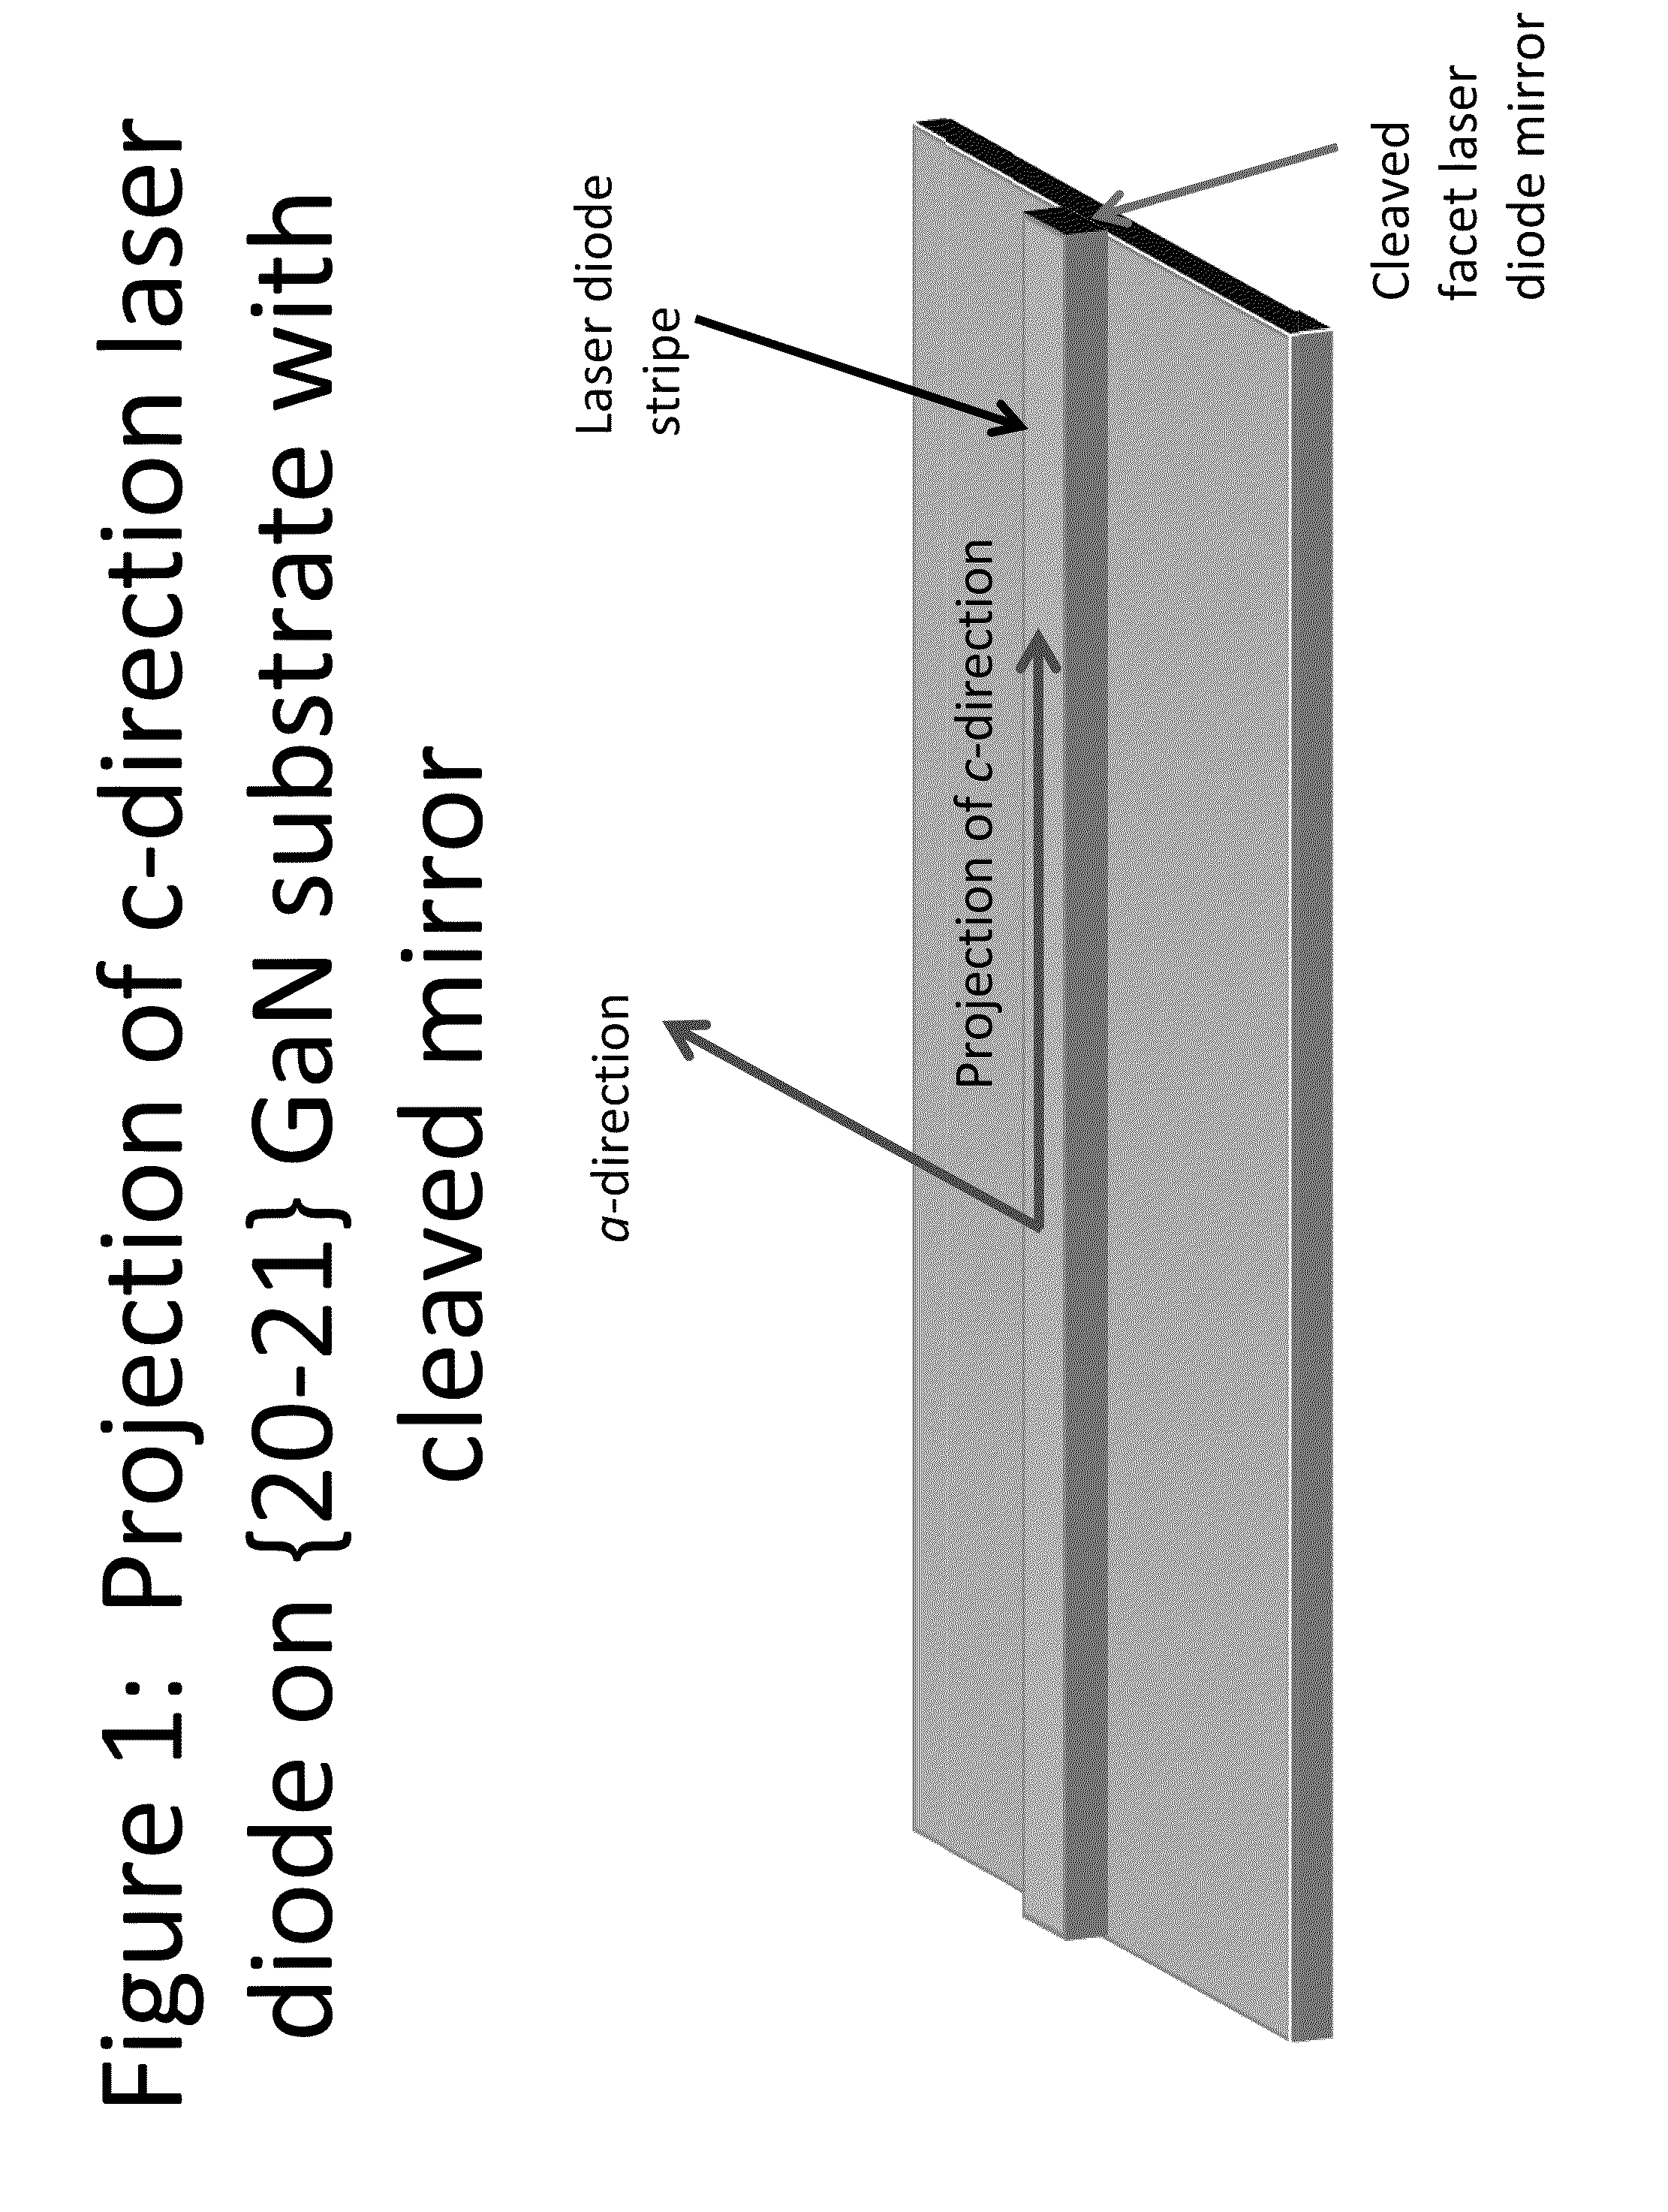 Growth Structures and Method for Forming Laser Diodes on  or Off Cut Gallium and Nitrogen Containing Substrates